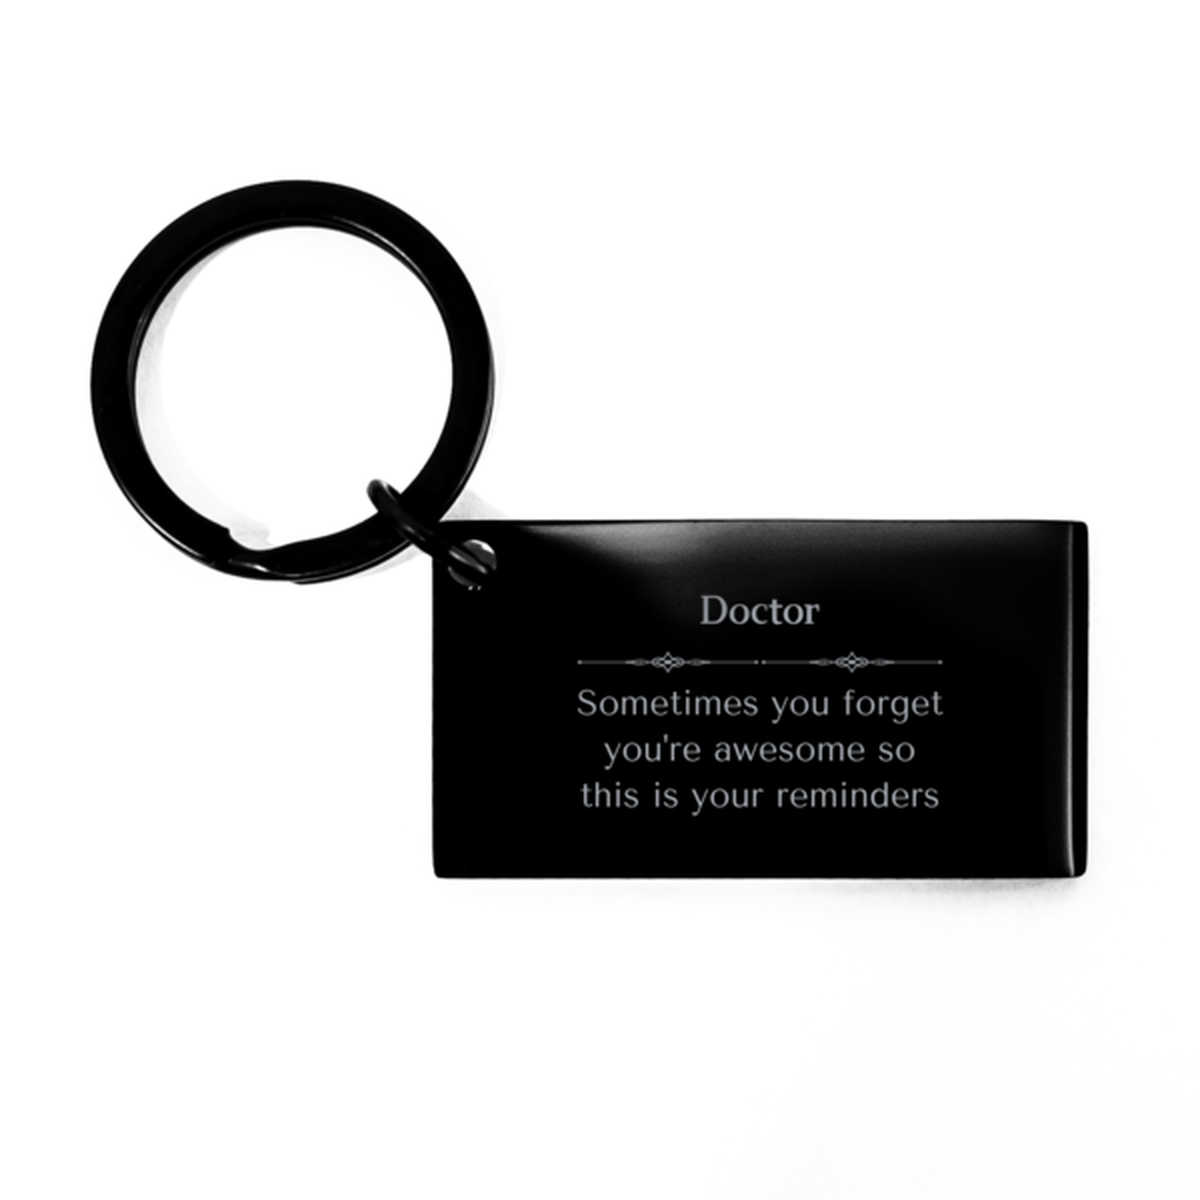 Sentimental Doctor Keychain, Health and Safety Engineer Sometimes you forget you're awesome so this is your reminders, Graduation Christmas Birthday Gifts for Doctor, Men, Women, Coworkers